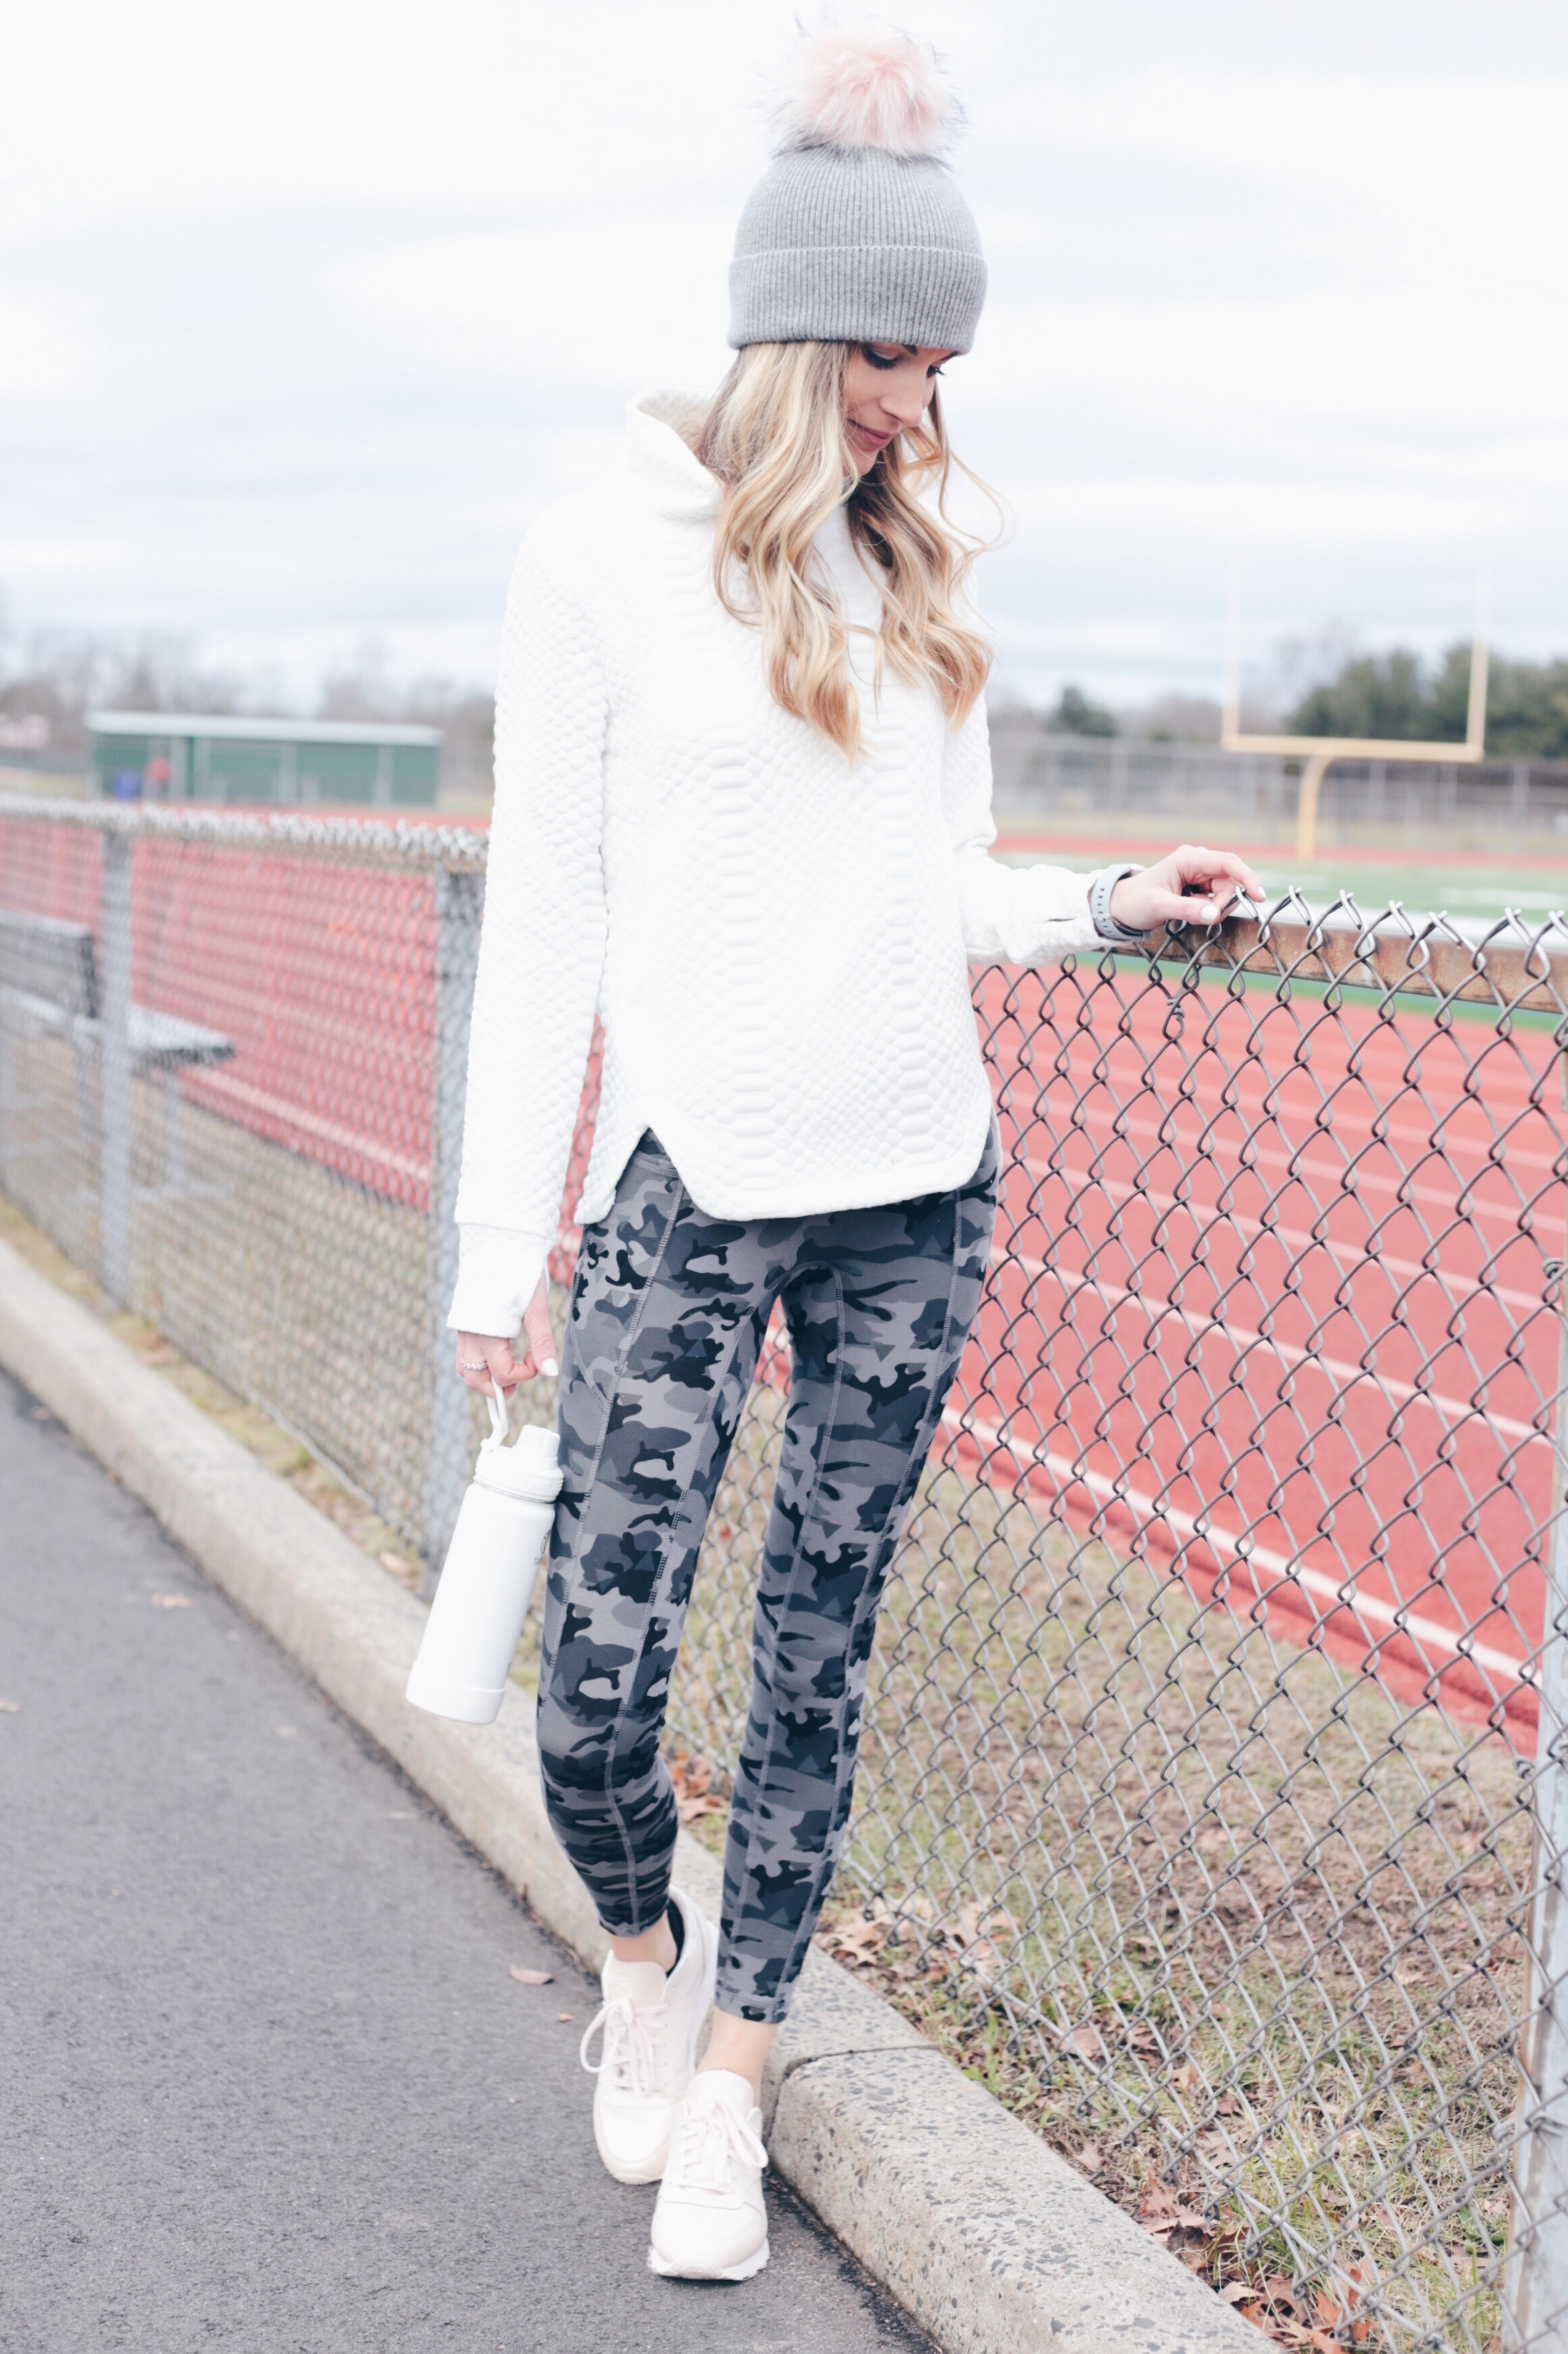 Winter Athleisure Outfit Ideas